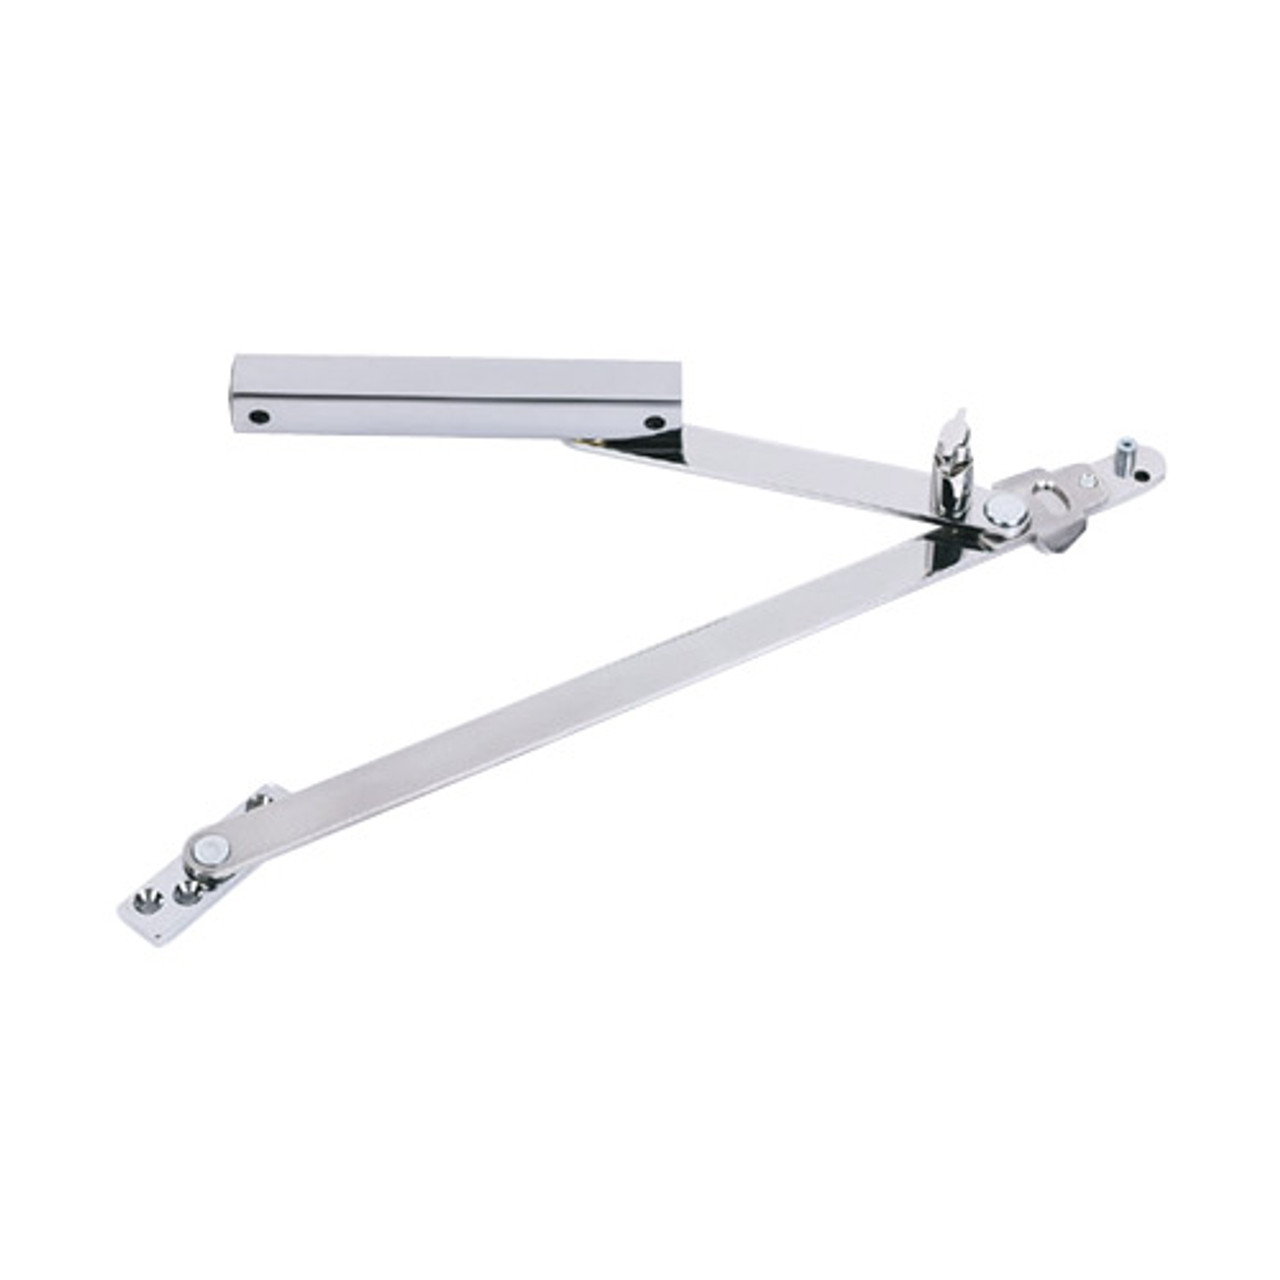 814H-US32 Glynn-Johnson 81 Series Heavy Duty Surface Overhead in Bright Stainless Steel